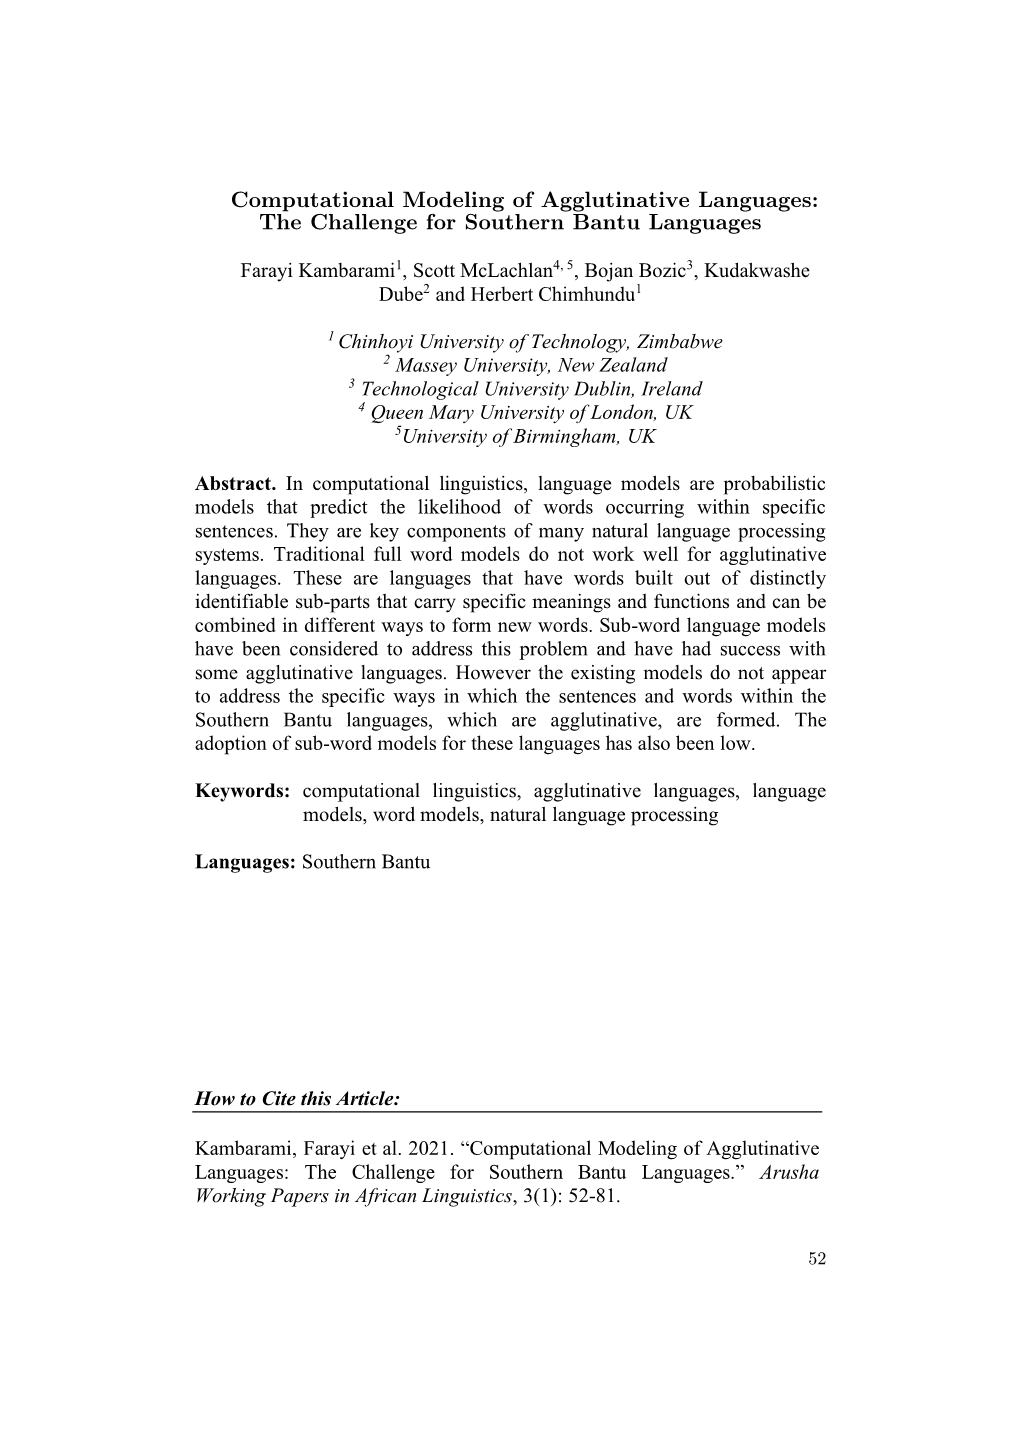 Computational Modeling of Agglutinative Languages: the Challenge for Southern Bantu Languages